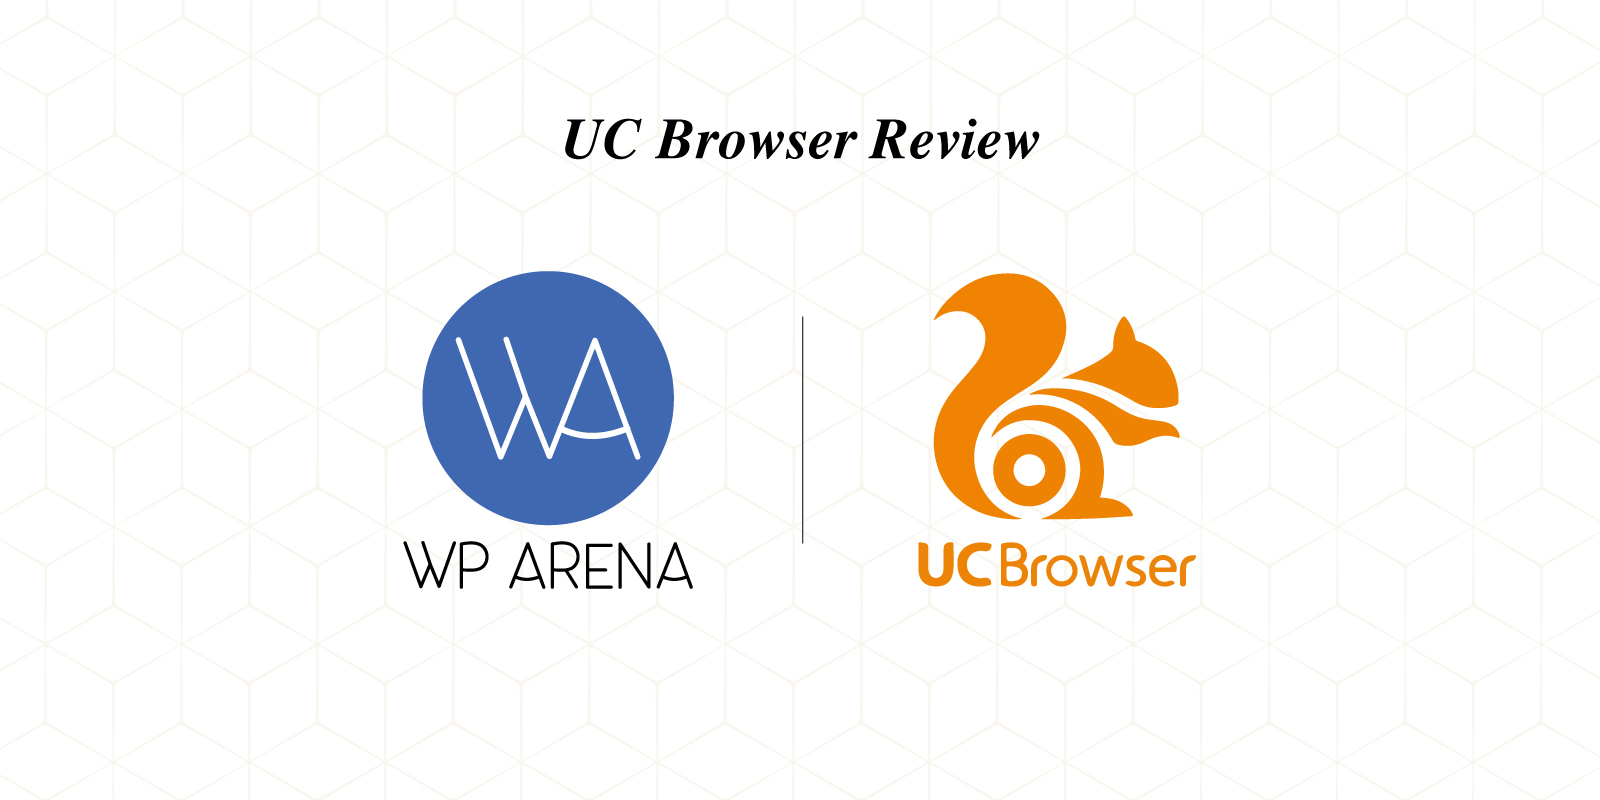 UC Browser – The Extensive Review of Chinese Browser